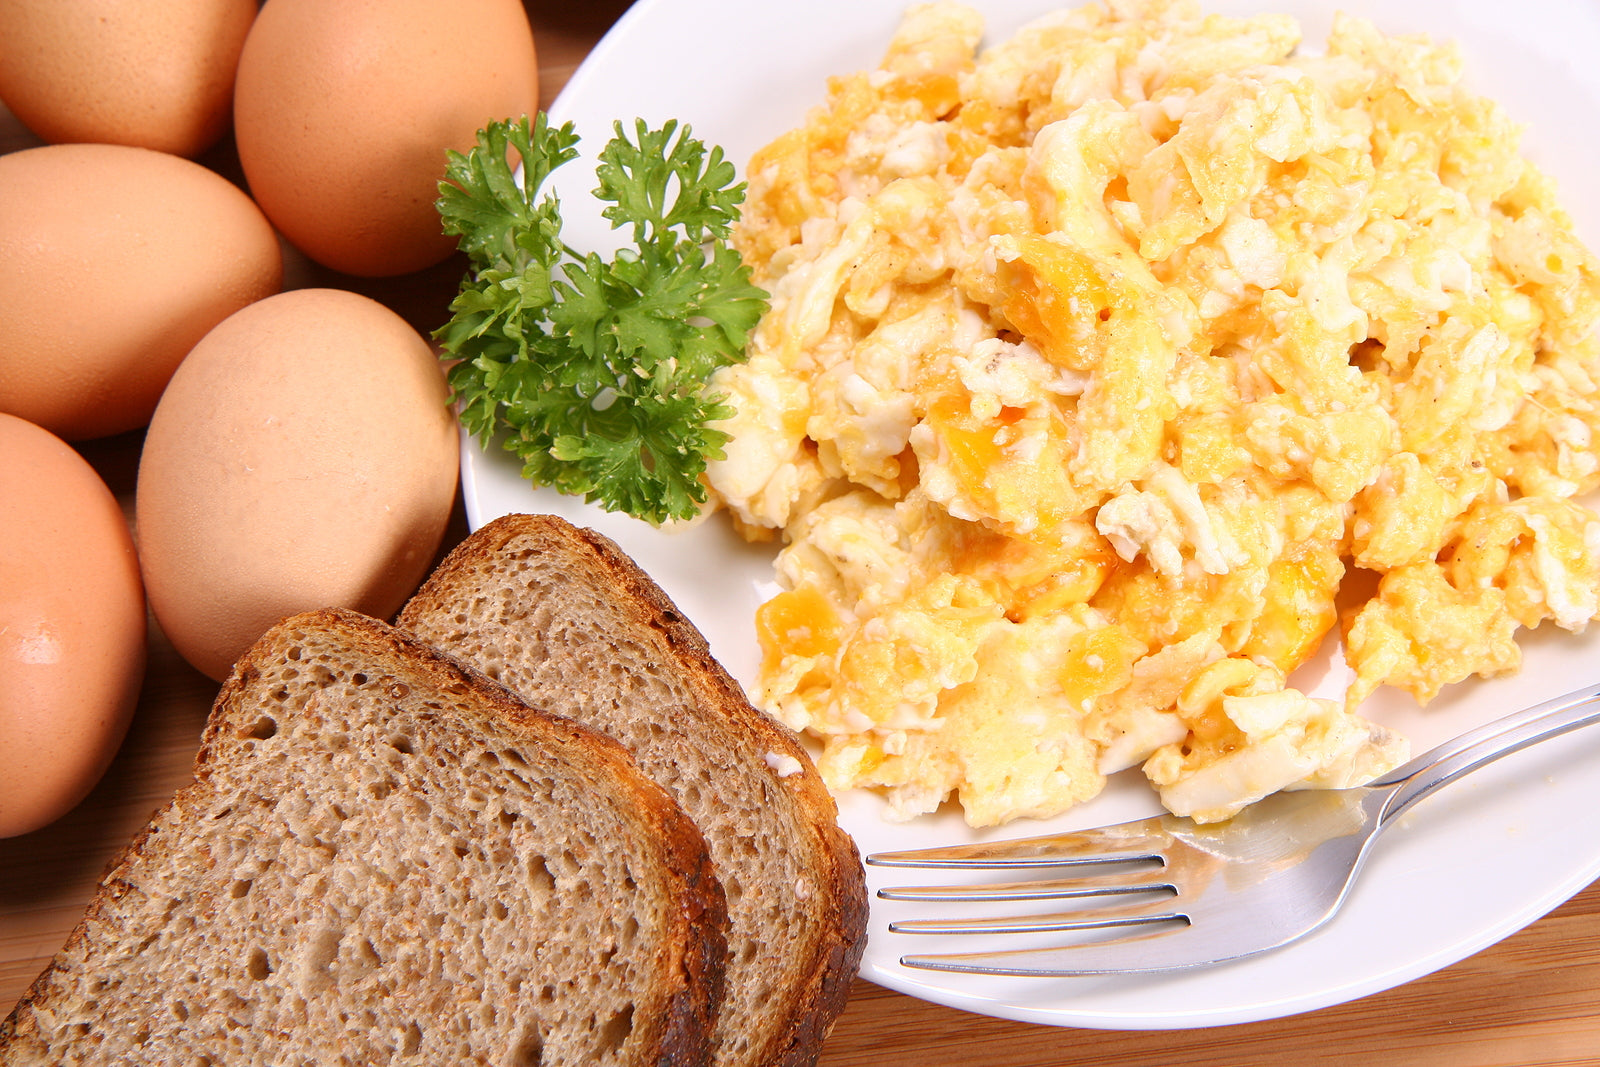 Powdered eggs are one of the most versatile food storage options on the market. Not only do powdered eggs provide tons of protein, but you can use them as a standalone meal as scrambled eggs or an omelet. They are also great to use in recipes that do not specifically call for powdered eggs. 